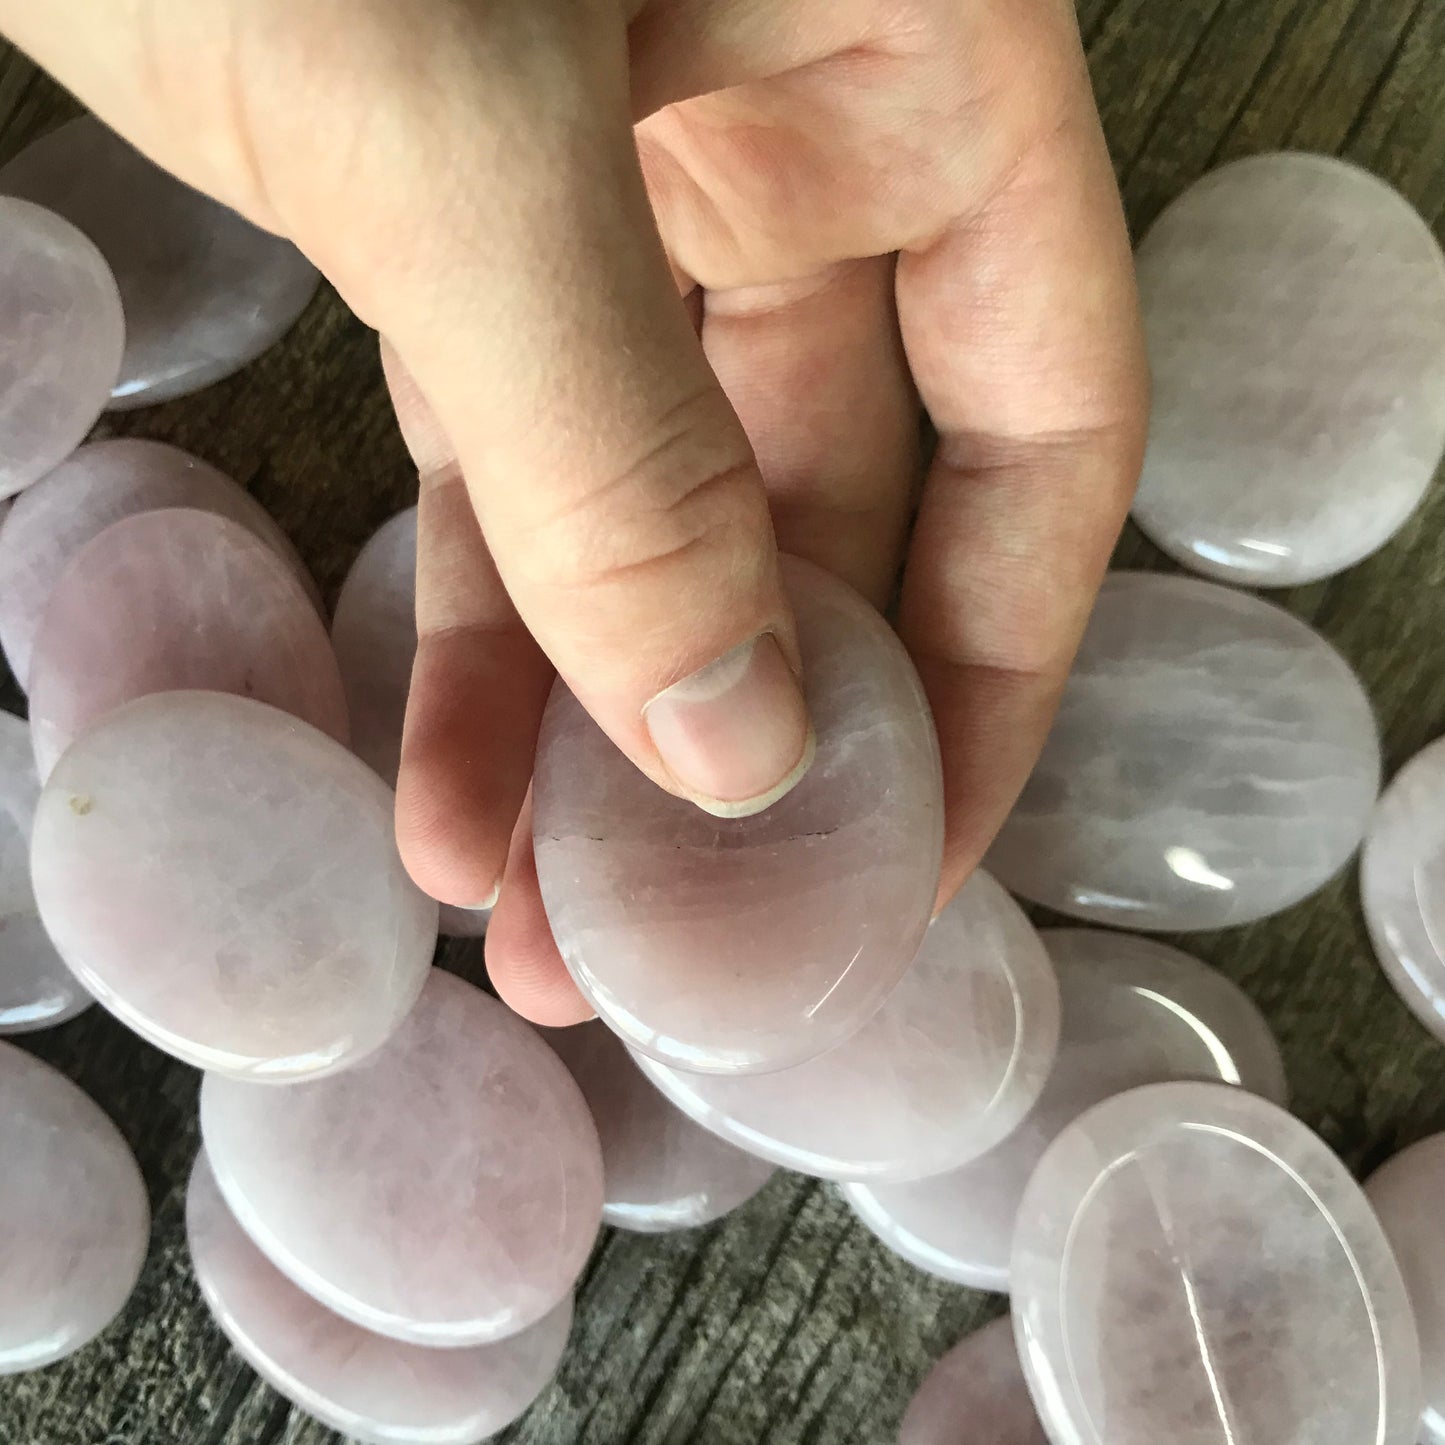 Rose Quartz Worry Stone (Approx. 1 3/8" x 1 3/4")  Polished Stone for the Heart Chakra, for Wire Wrapping or Crystal Grid Supply 1406